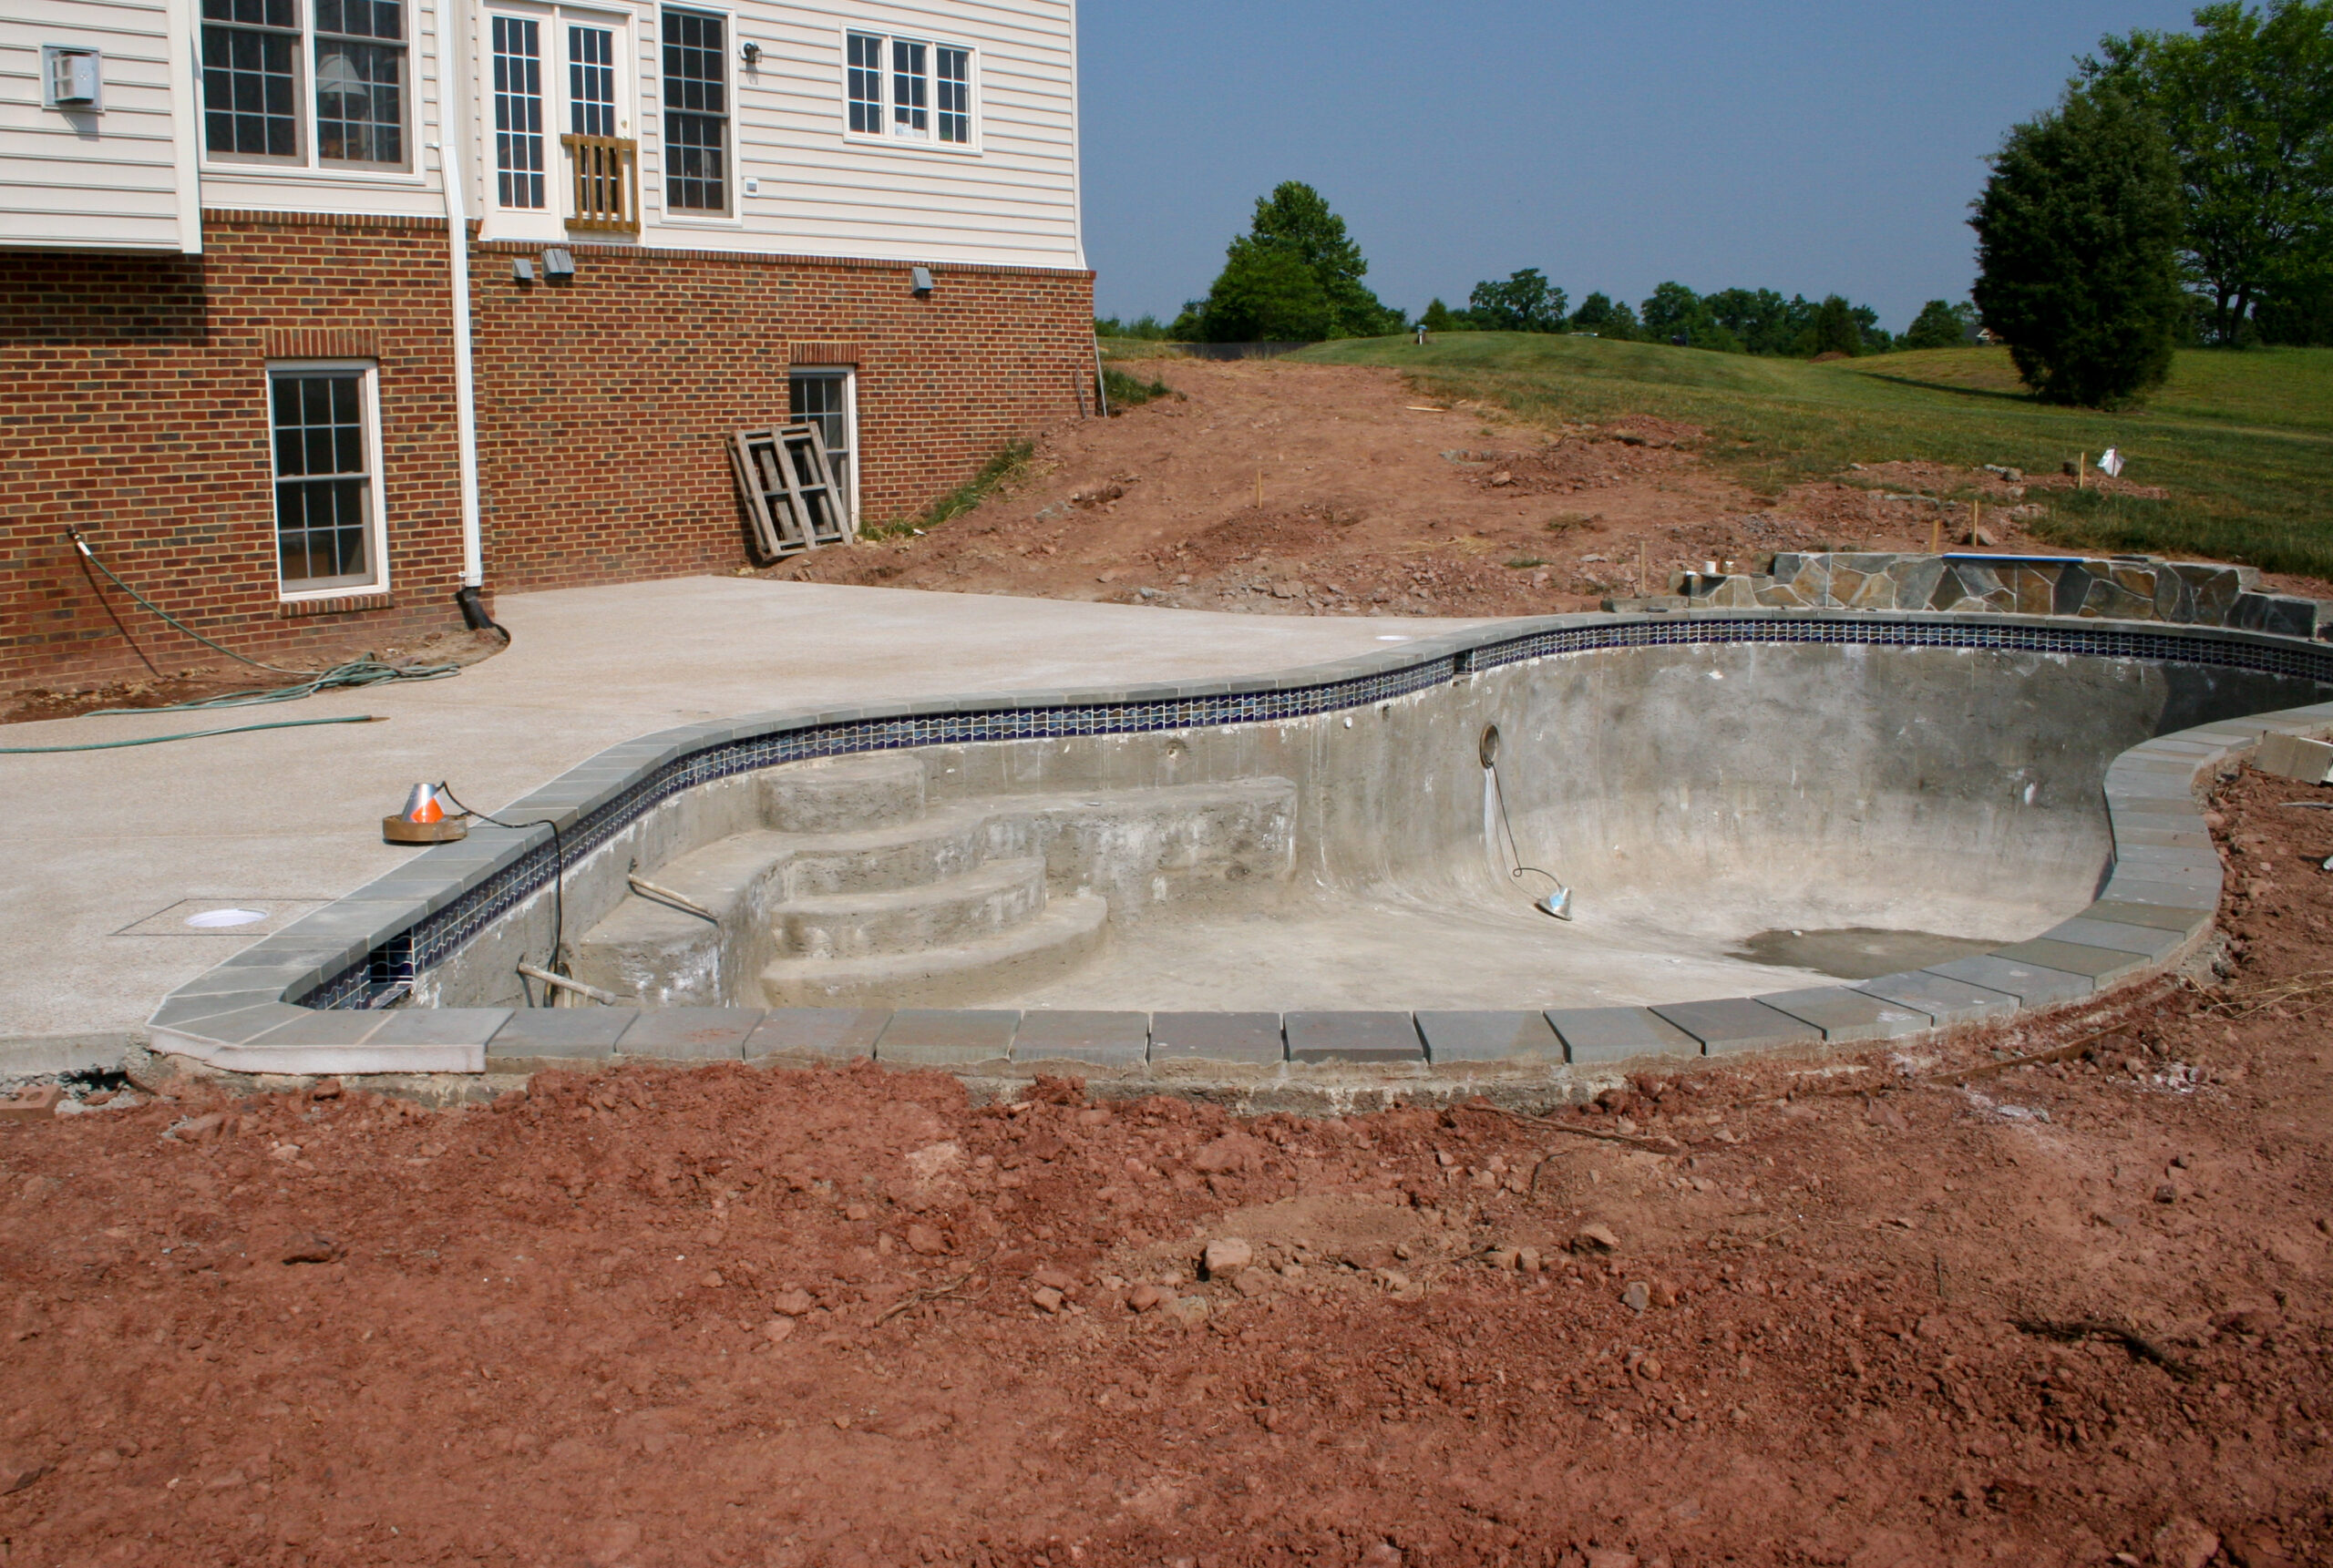 An empty pool that remains unfinished, with construction equipment and materials around it, awaiting completion.